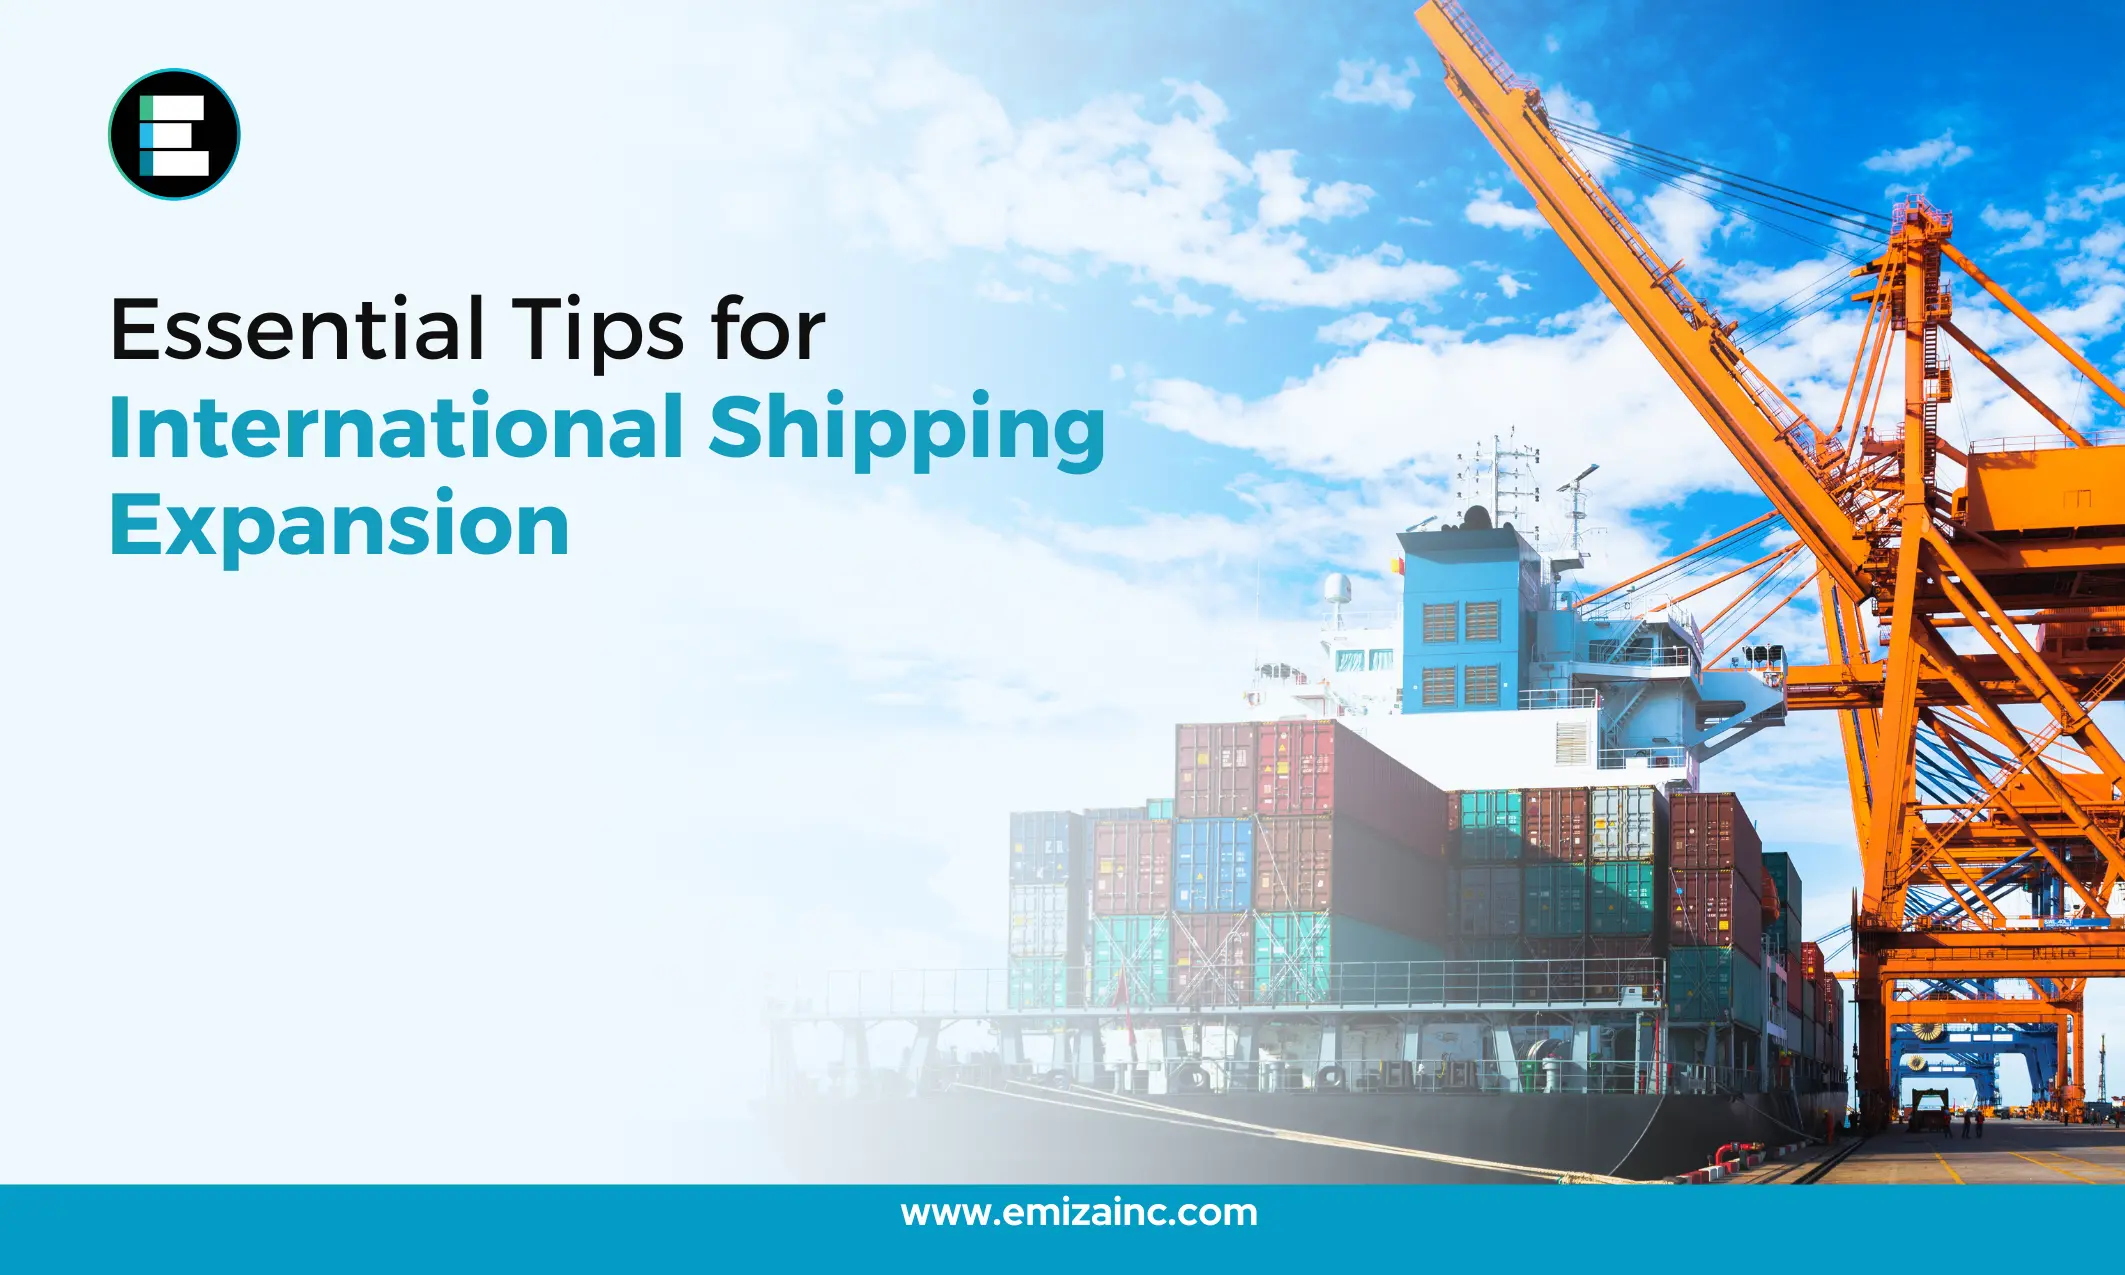 Essential Tips for International Shipping Expansion